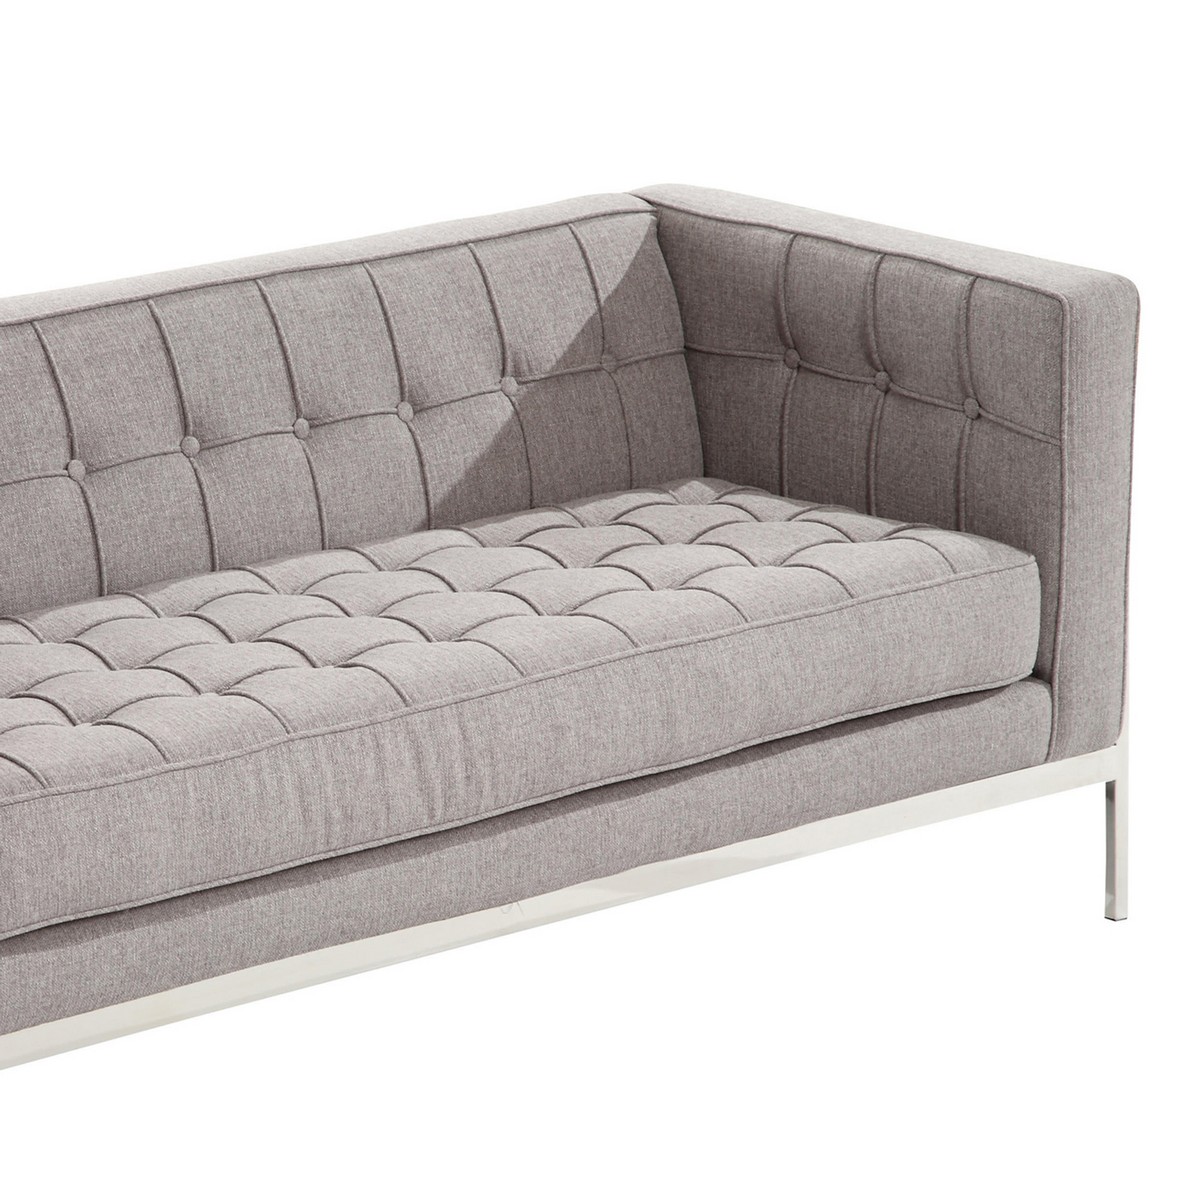 Armen Living Andre Contemporary Loveseat In Gray Tweed and Stainless Steel